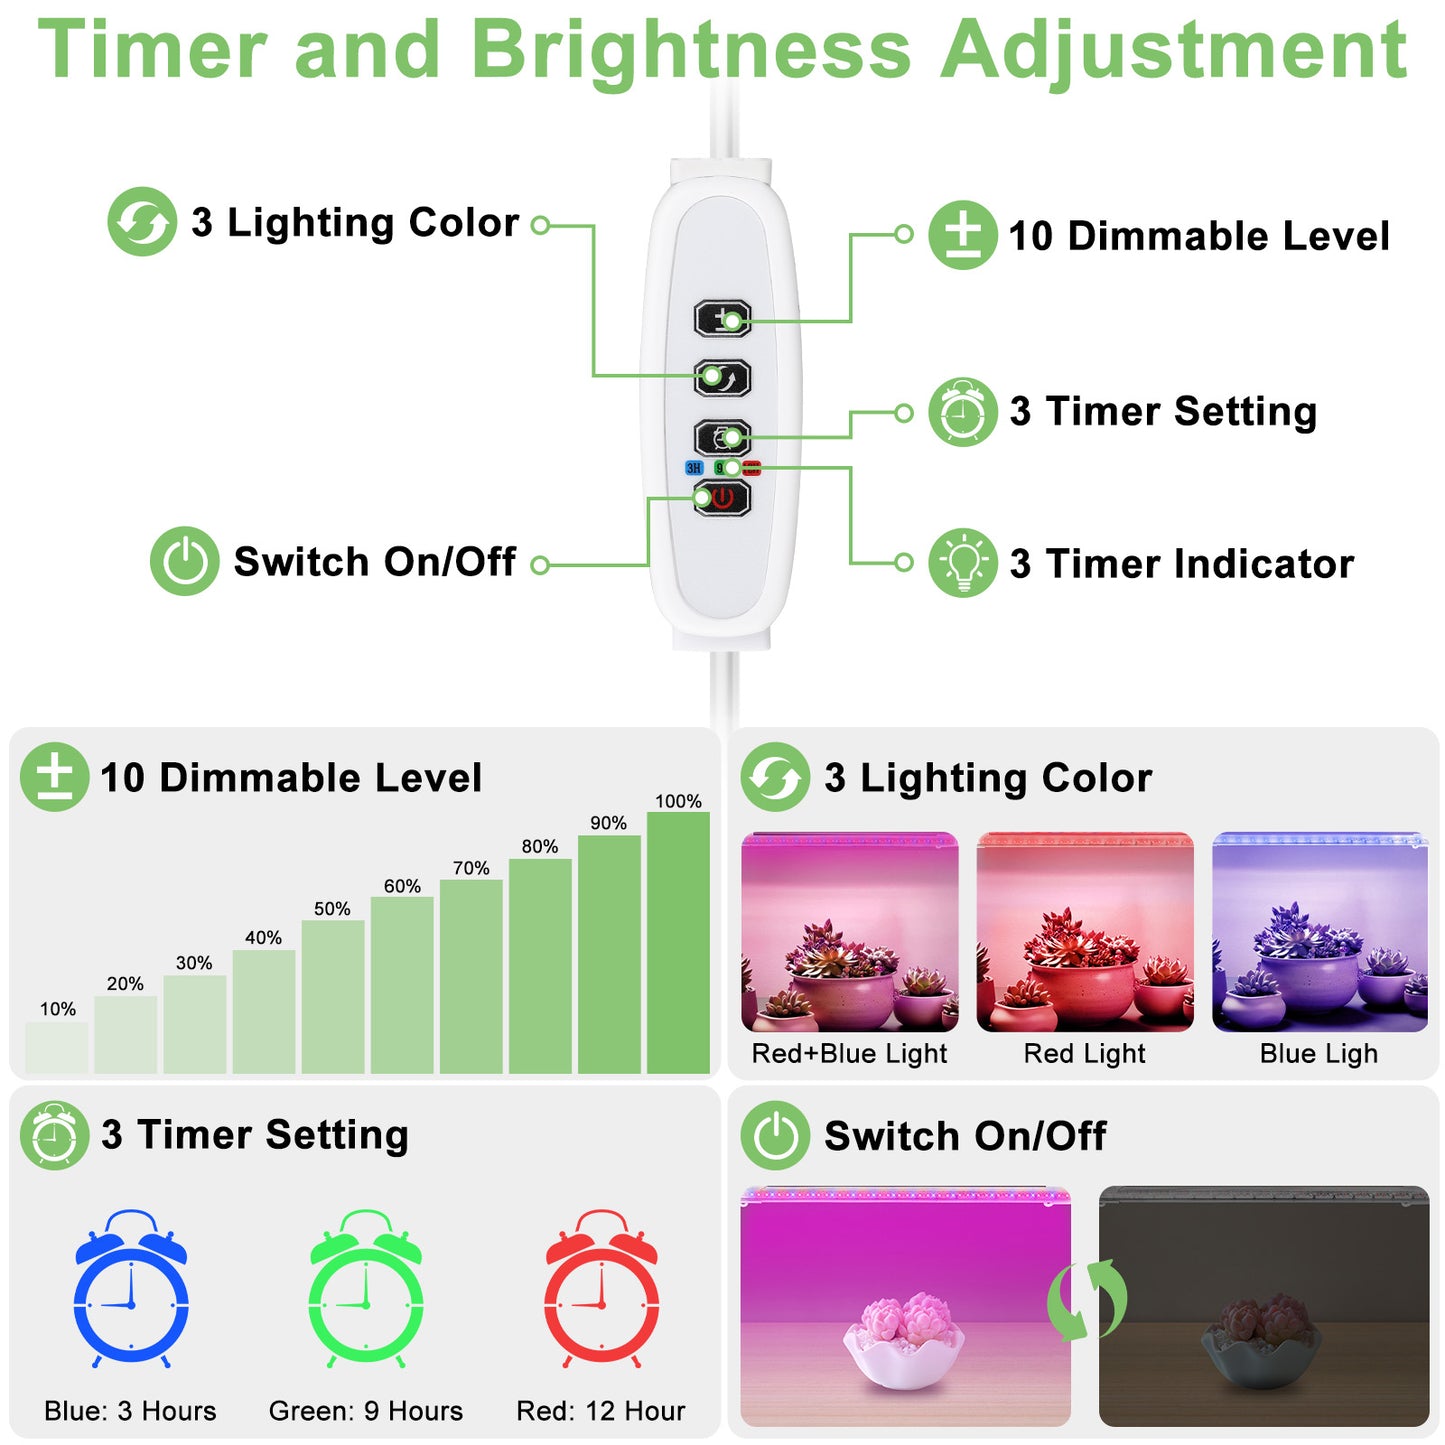 LED Plant Grow Light Strips - Full Spectrum Light Two Strips for Indoor Plants, Succulents, Seedlings, and Greenhouse Gardens